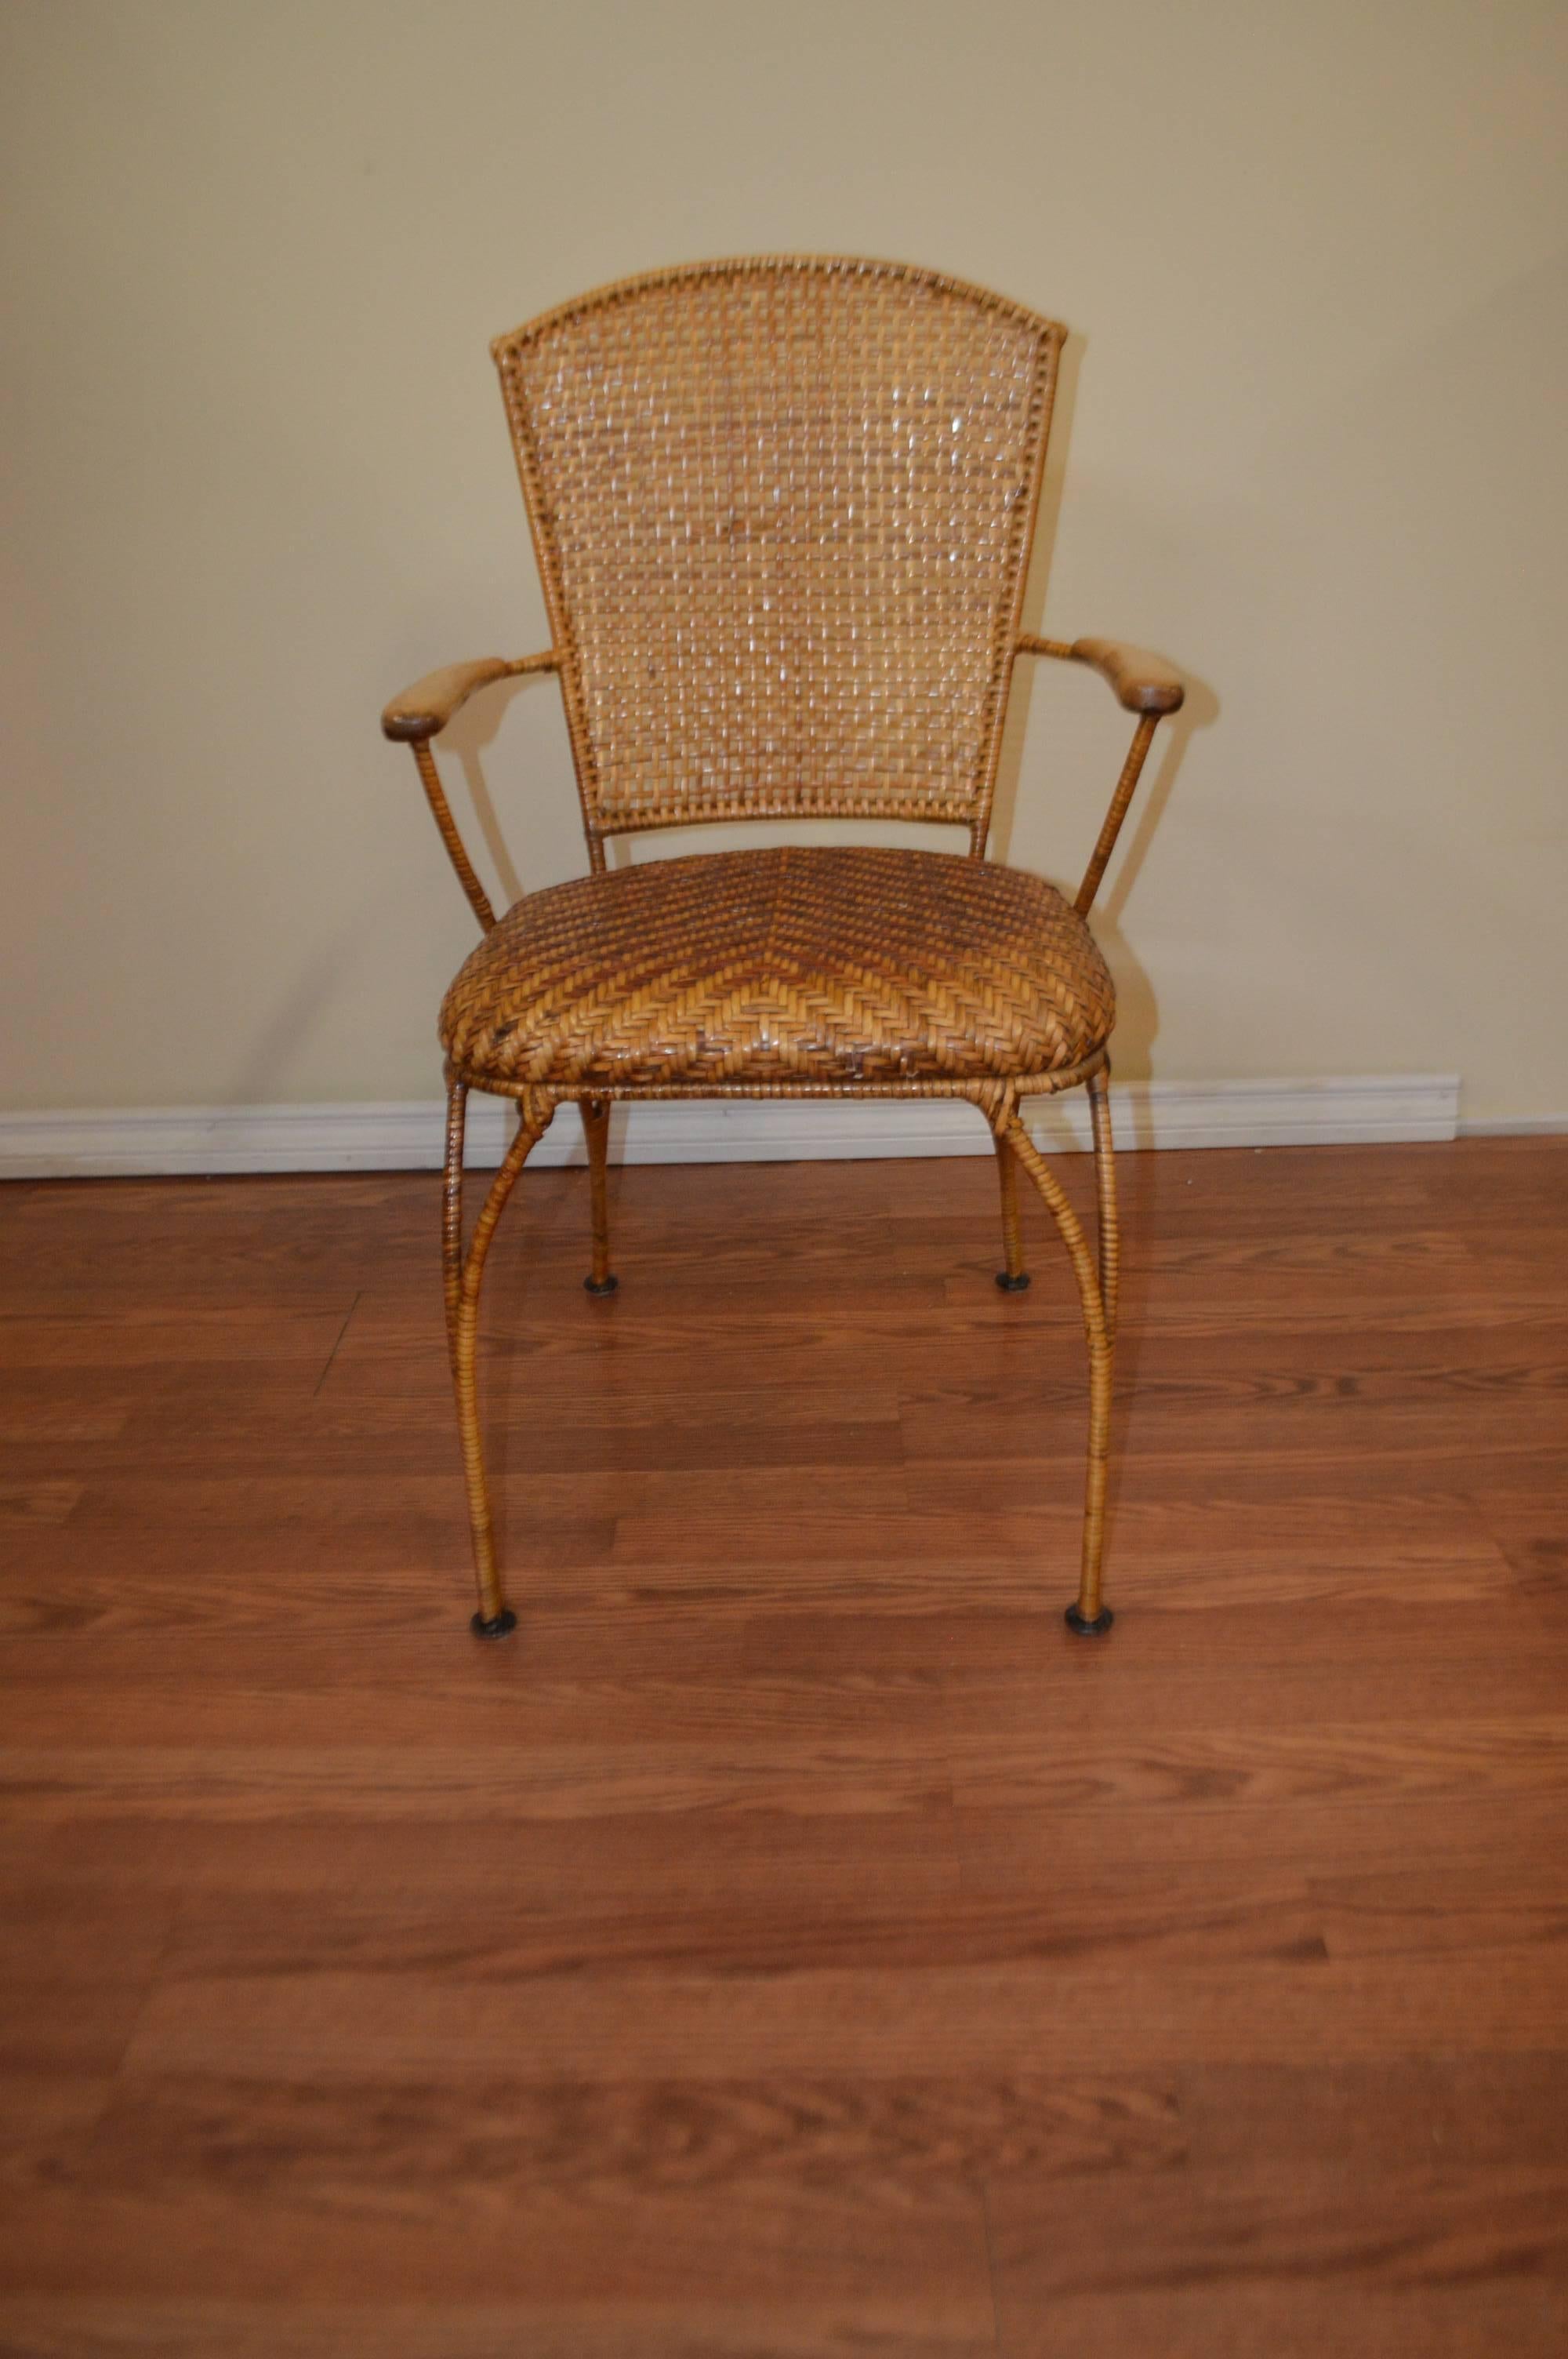 Unusual midcentury all caned dining chairs found in France. The seat cane has a charming variation in color.